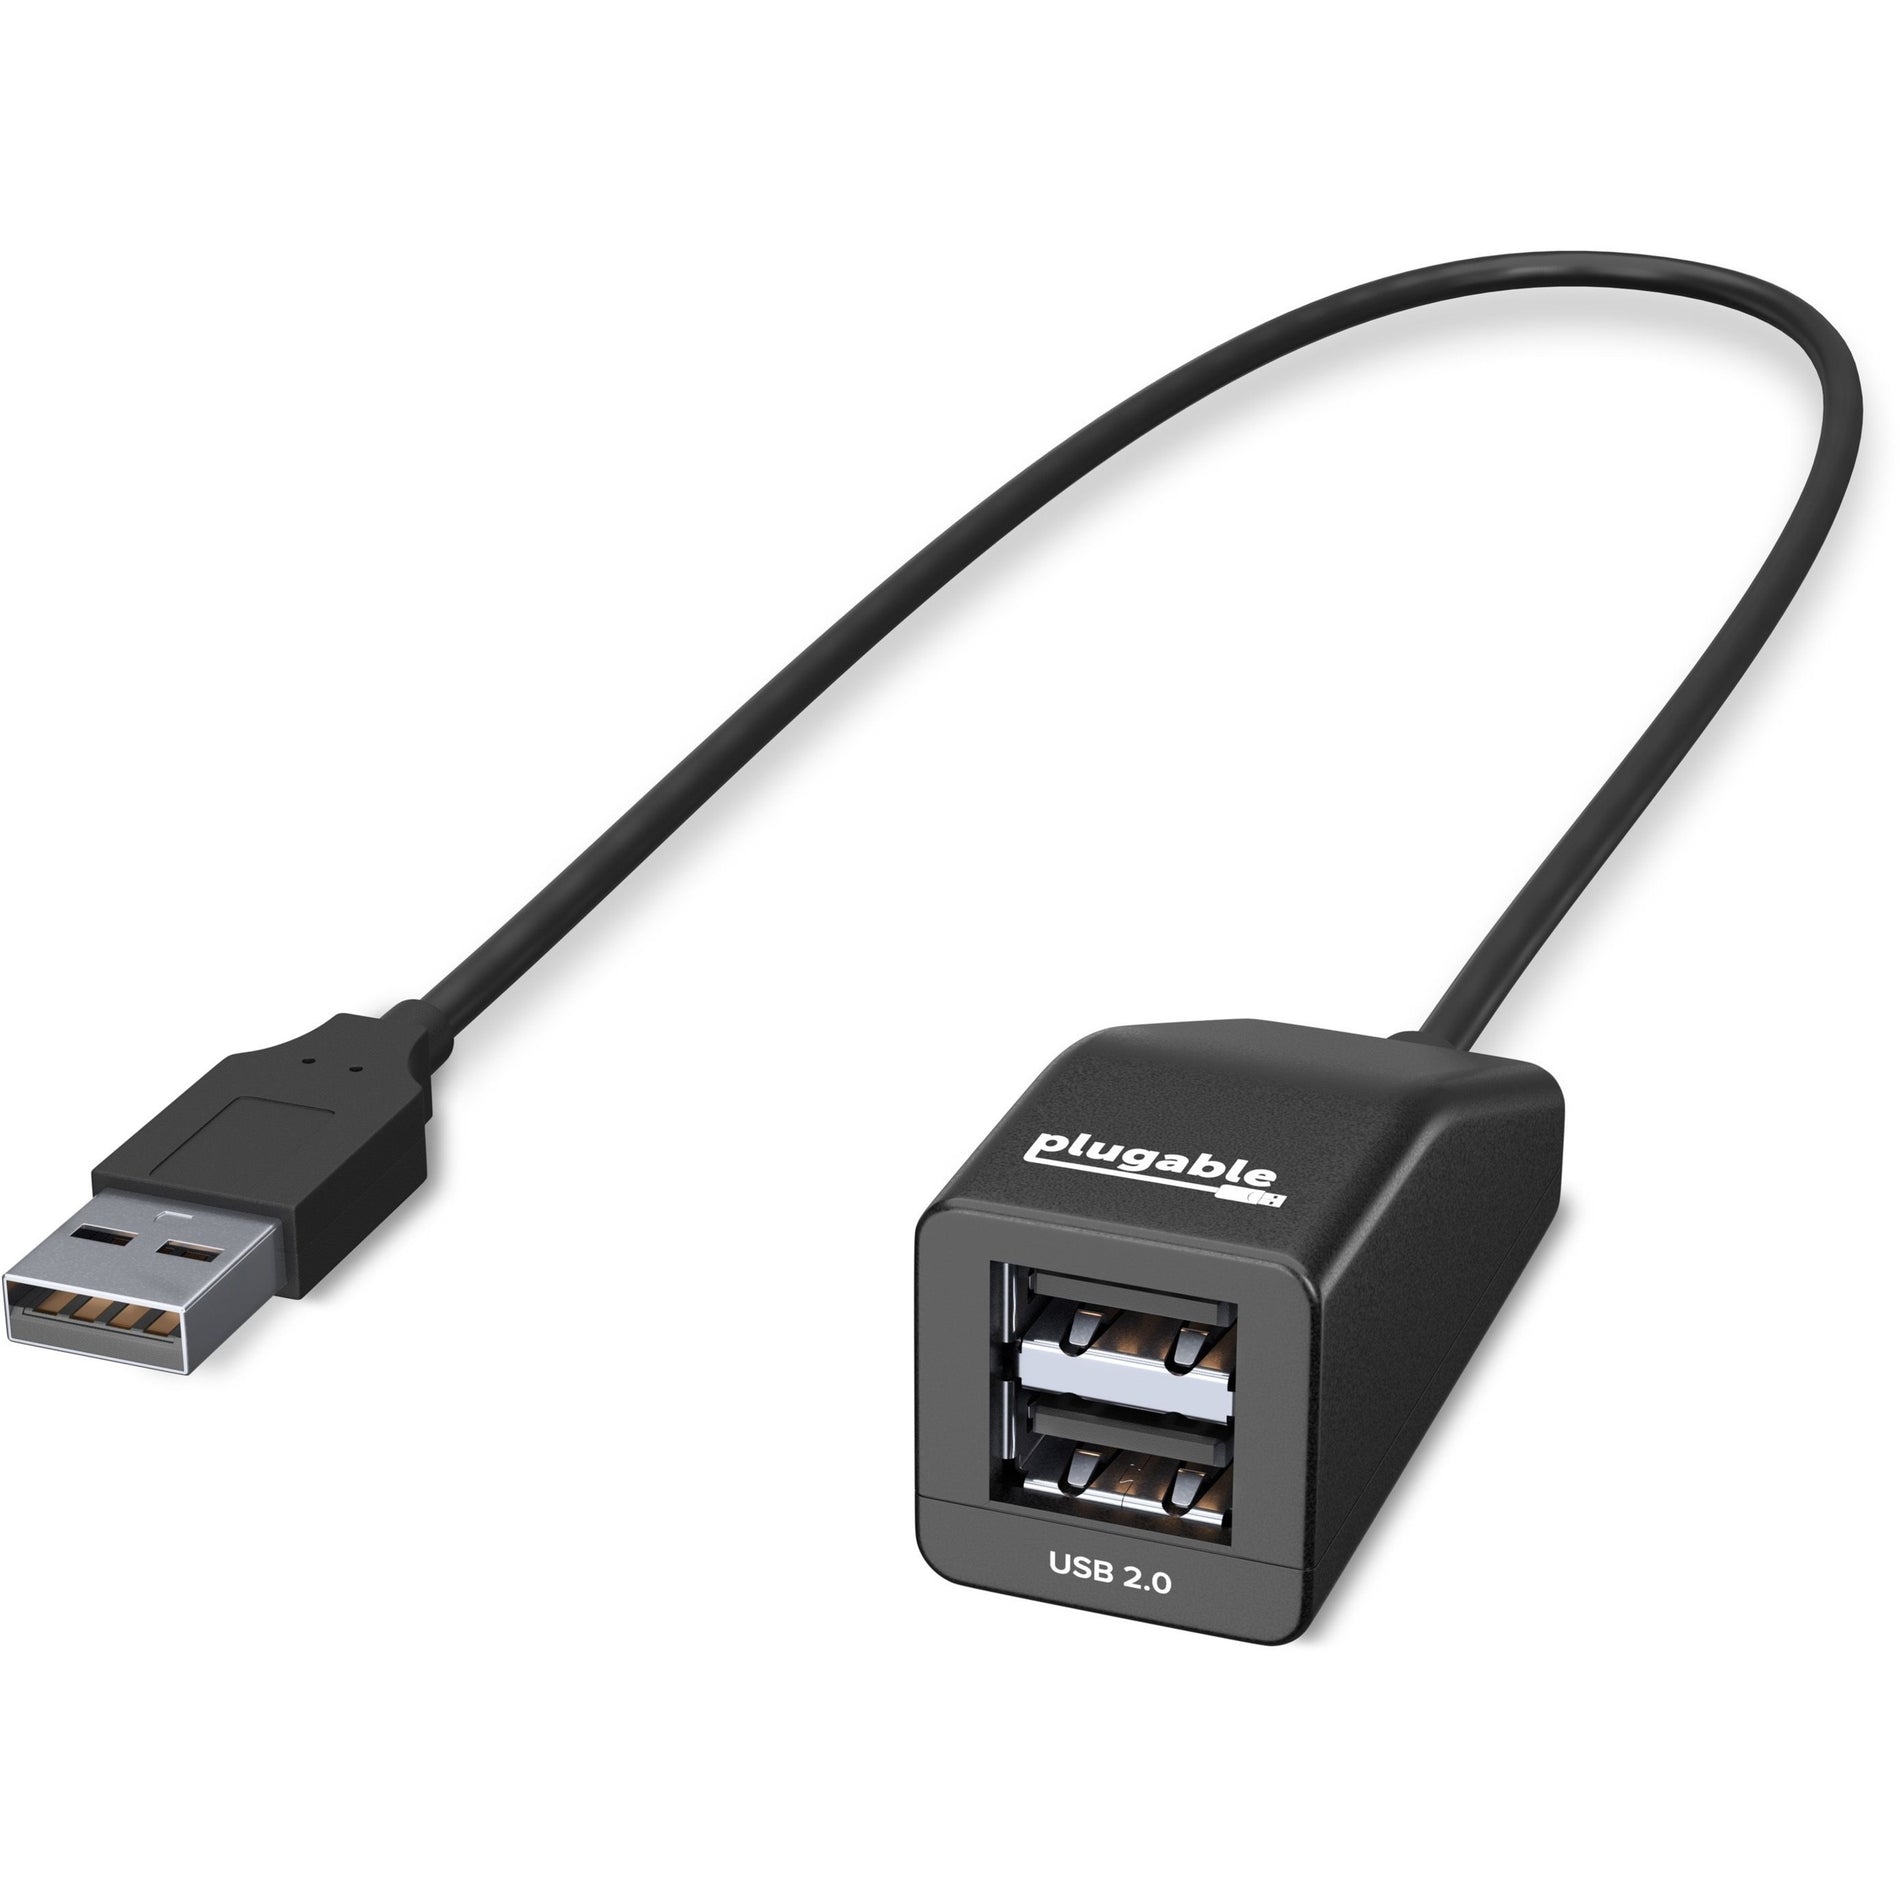 Plugable USB2-2PORT USB 2.0 2-Port High Speed Ultra Compact Hub Splitter, Easy Expansion for Your Devices